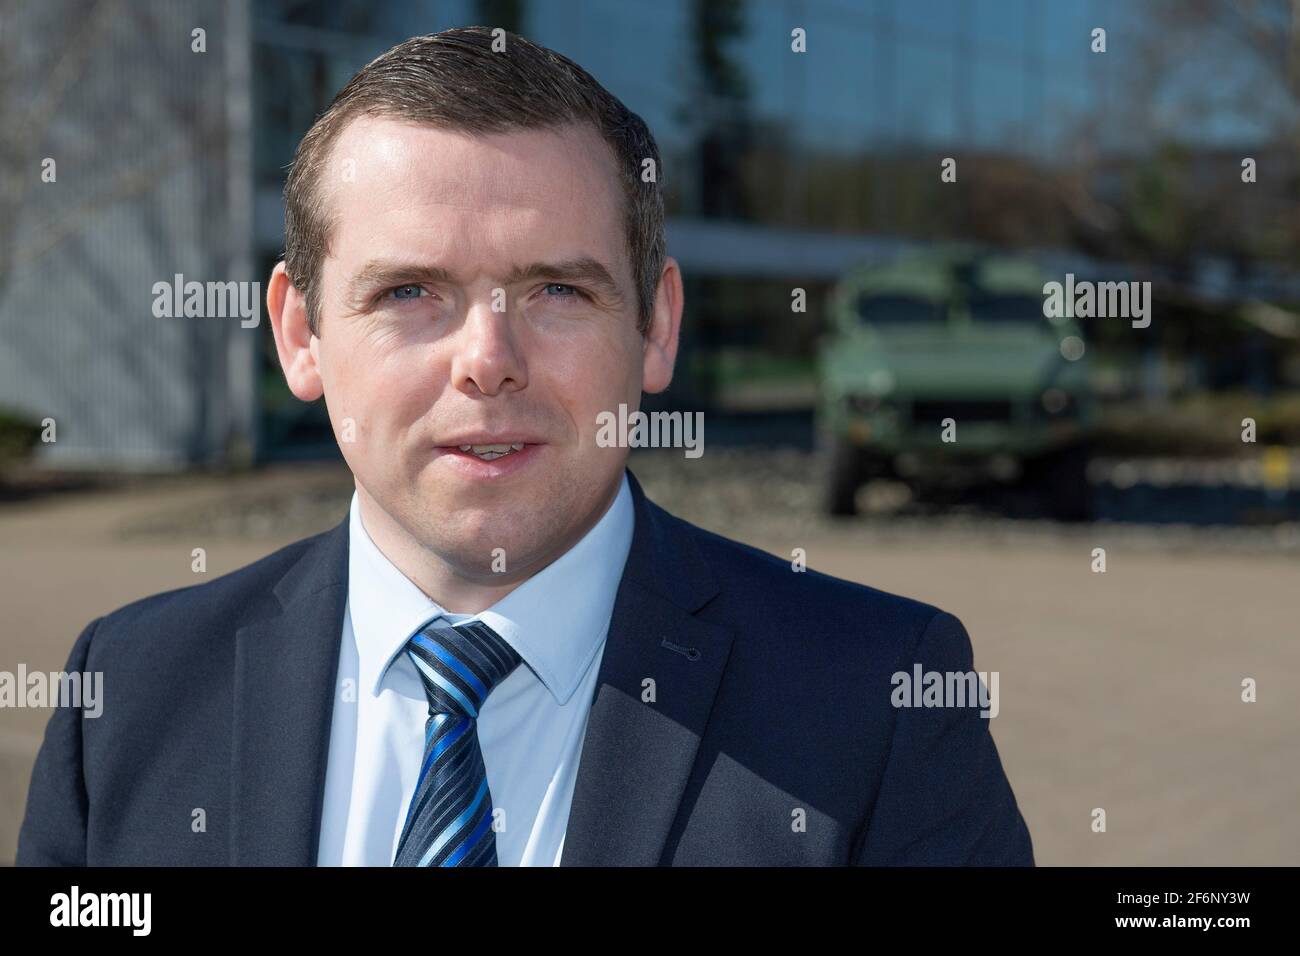 Glasgow, Scotland, UK. 2nd Apr, 2021. PICTURED: Douglas Ross MP, Leader of the Scottish Conservative and Unionist Party. Scottish Conservative proposals for demand-led apprenticeships and expand on the party's plans for a skills revolution as the Scottish Conservative Leader visits Thales Optronics in Glasgow. Credit: Colin Fisher/Alamy Live News Stock Photo